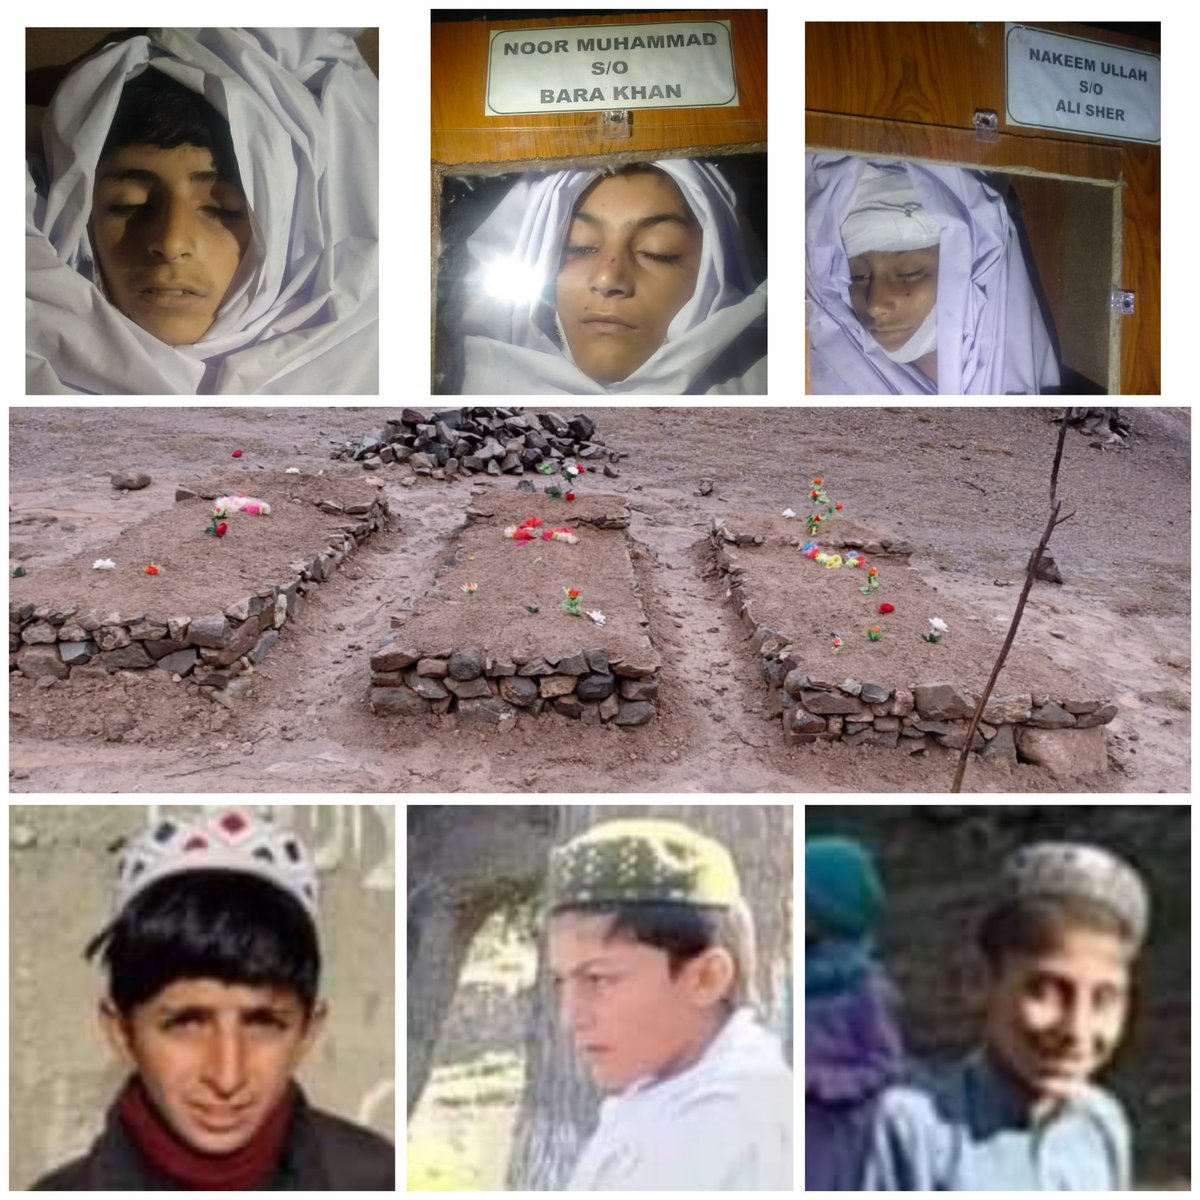 #LandminesTragedy: 3 children martyred, 1 injured in a landmine explosion in South Waziristan. Families told by army they entered a prohibited area, though there shouldn't be such areas with landmines. Army provided 1.4 million Rs to each family. The Govt must act 2 #DeMineExFATA